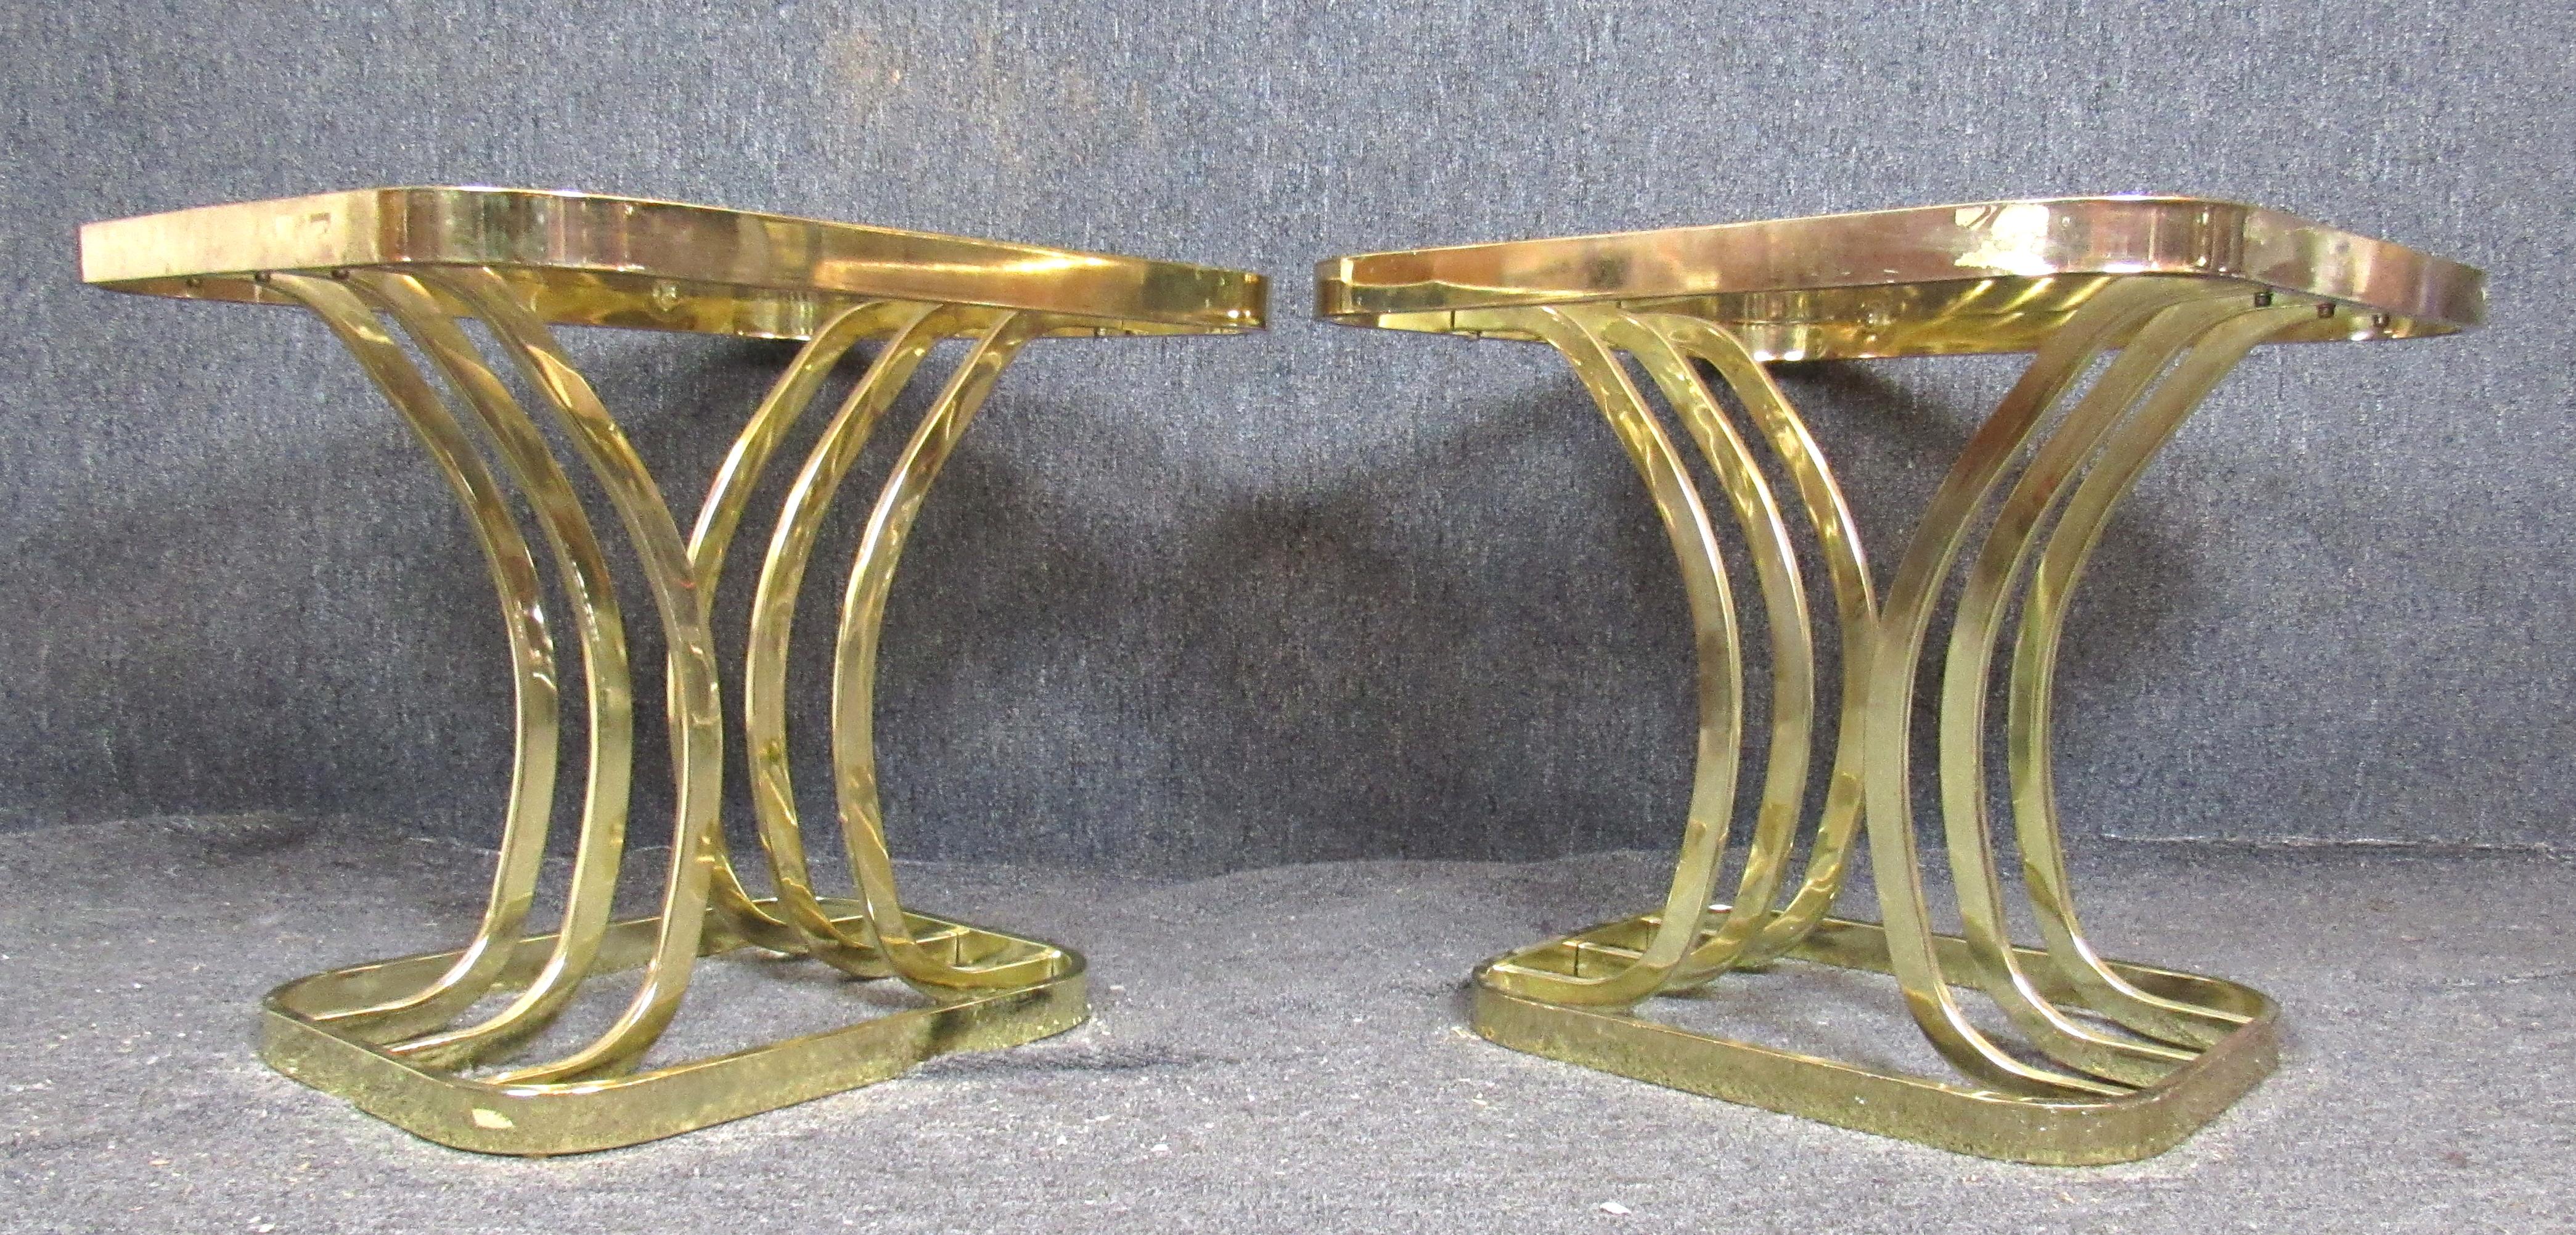 Pair of bright brass base side tables with smoked glass. Attractive arched supports on a square base.
Please confirm location.